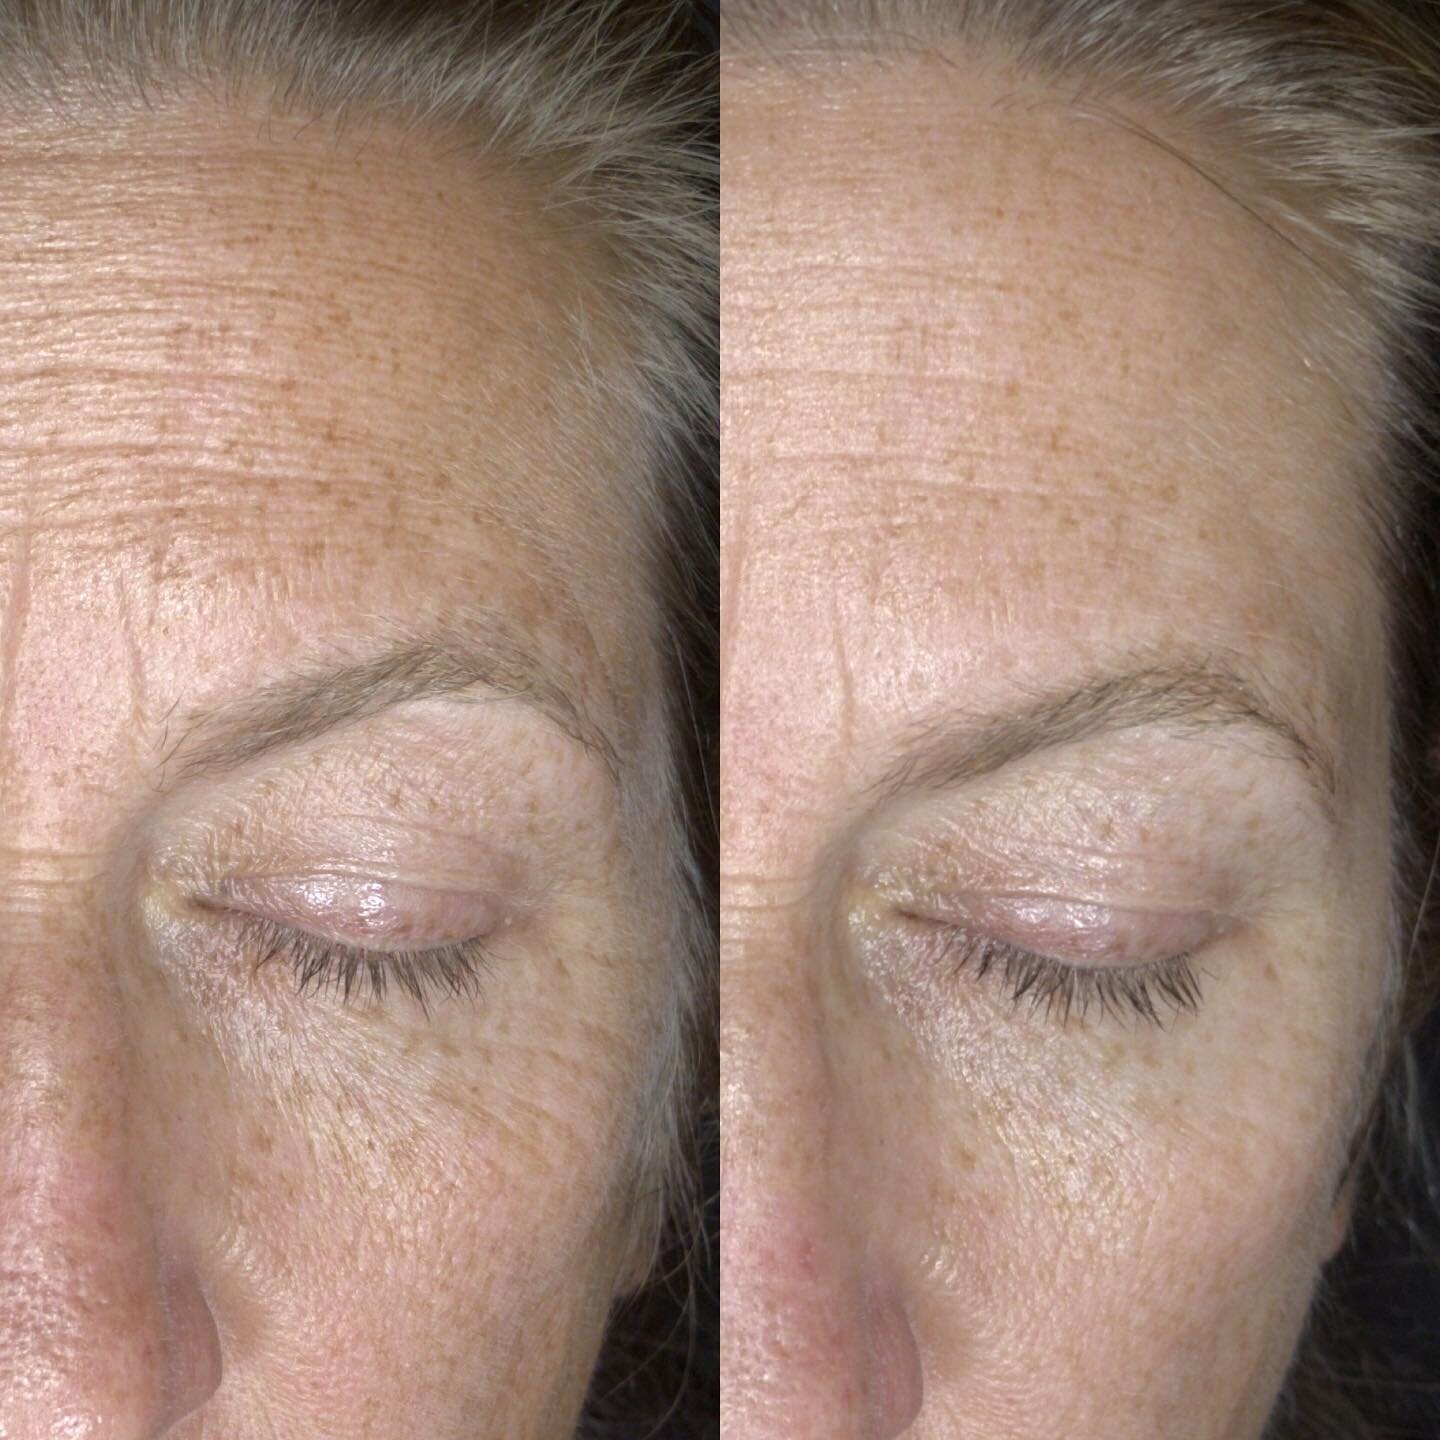 Did you know there is an alternative to anti-wrinkle injections that can still give you incredible results?

&ndash; Venus Viva &ndash;

This client has had 3 x Venus Viva resurfacing treatments to target texture, fine lines and pigmentation. Over th